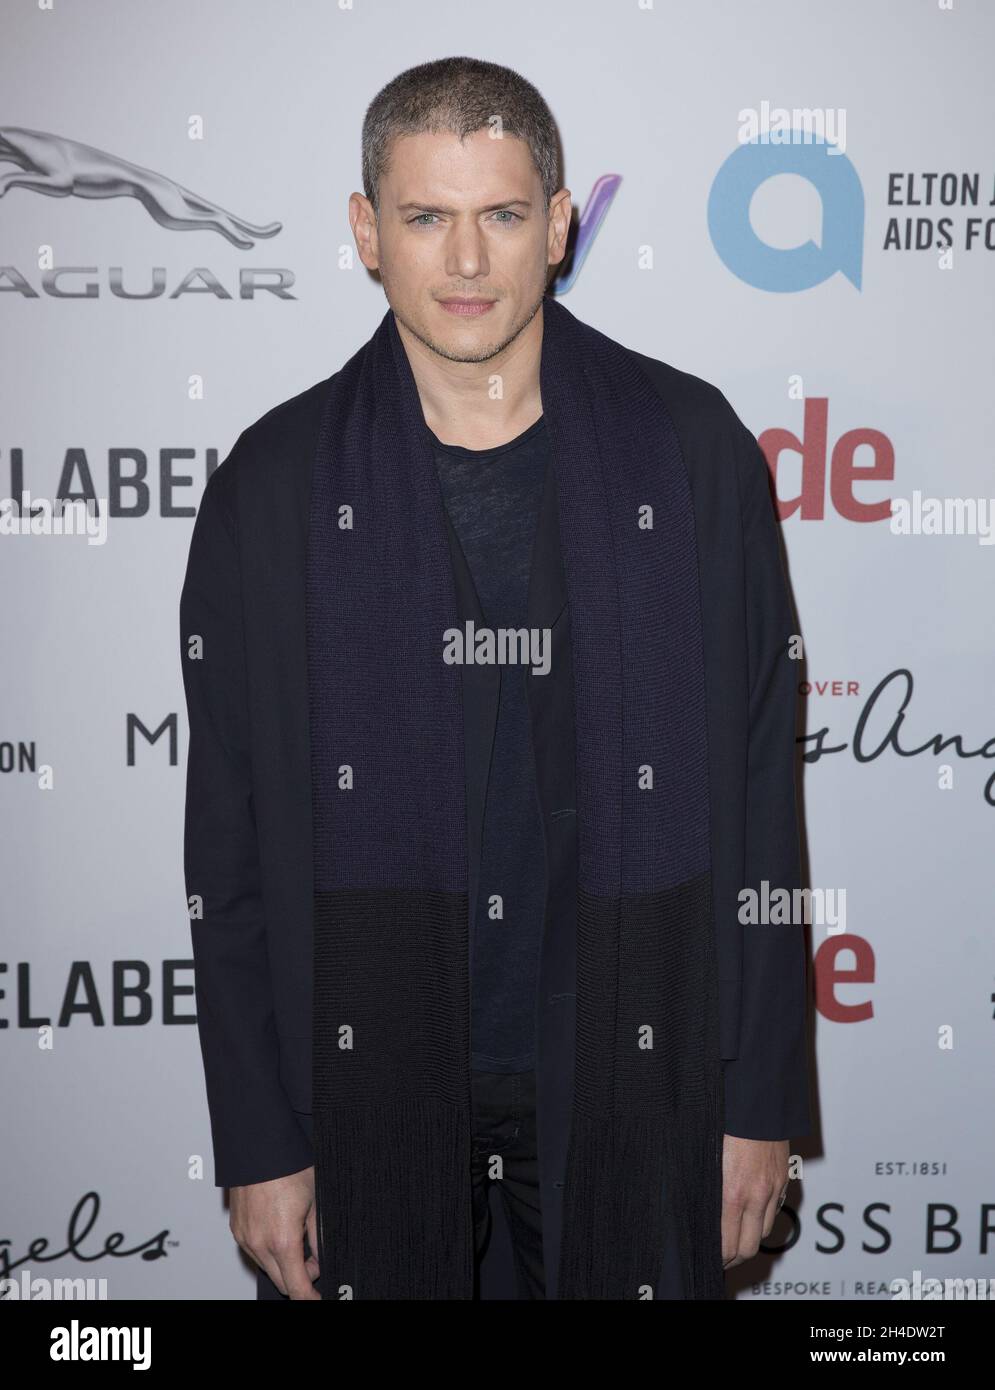 Wentworth Miller attends the 2016 Attitude Awards in association with Virgin Holidays, at 8 Northumberland Avenue, London. Monday October 10, 2016. Photo credit should read: Isabel Infantes / EMPICS Entertainment. Stock Photo